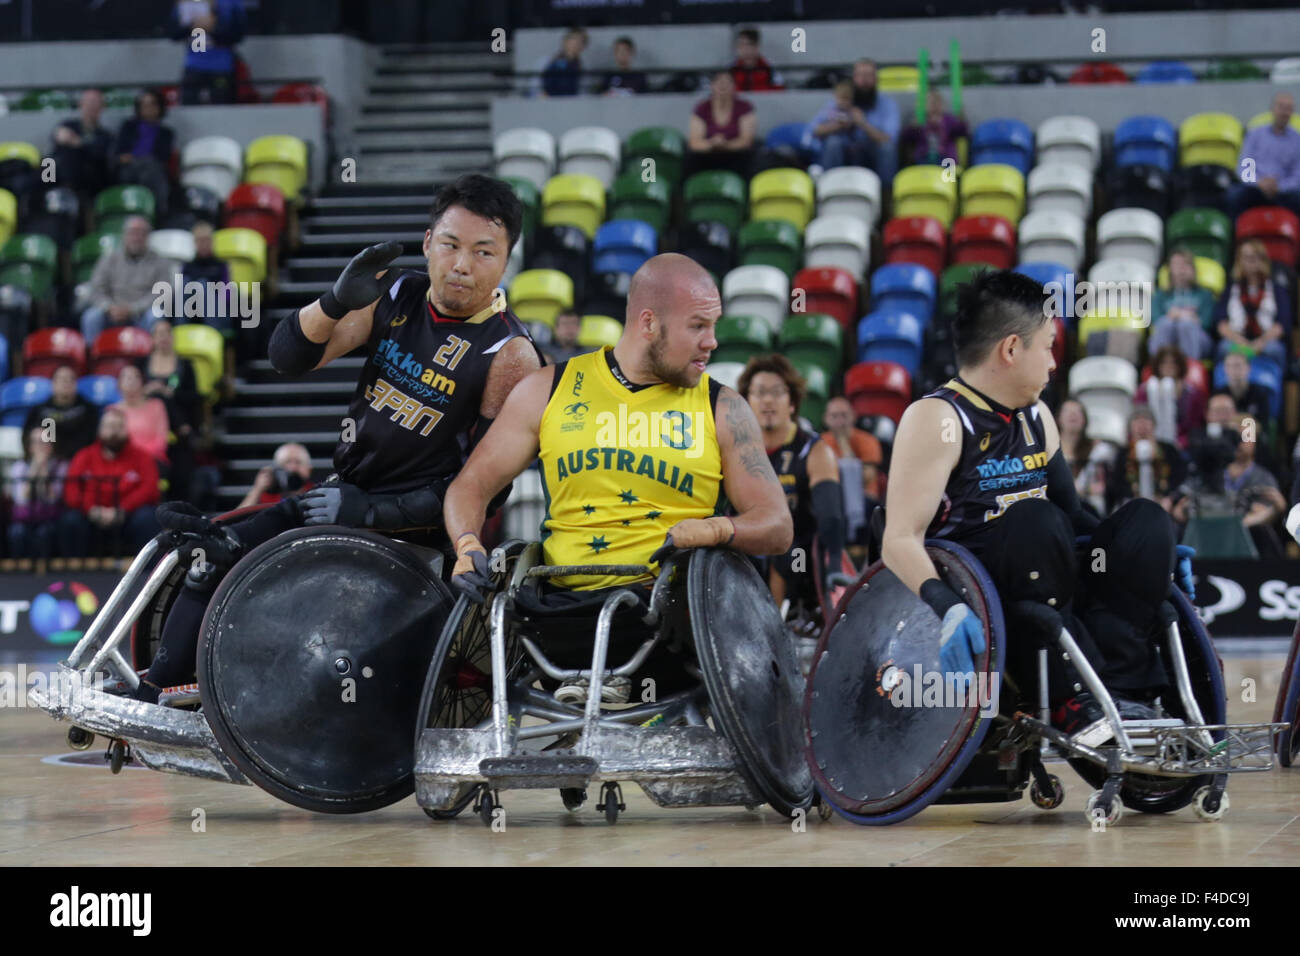 London, UK. 16th October, 2015. World Wheelchair Rugby Challenge Team Aus beat Japan 60-55 to win Bronze medal. Copperbox, Olympic Park, London, Aus Batt is tackled by Japan's Yukinobu. UK. 16th October, 2015. copyright carol moir/Alamy Live News Stock Photo